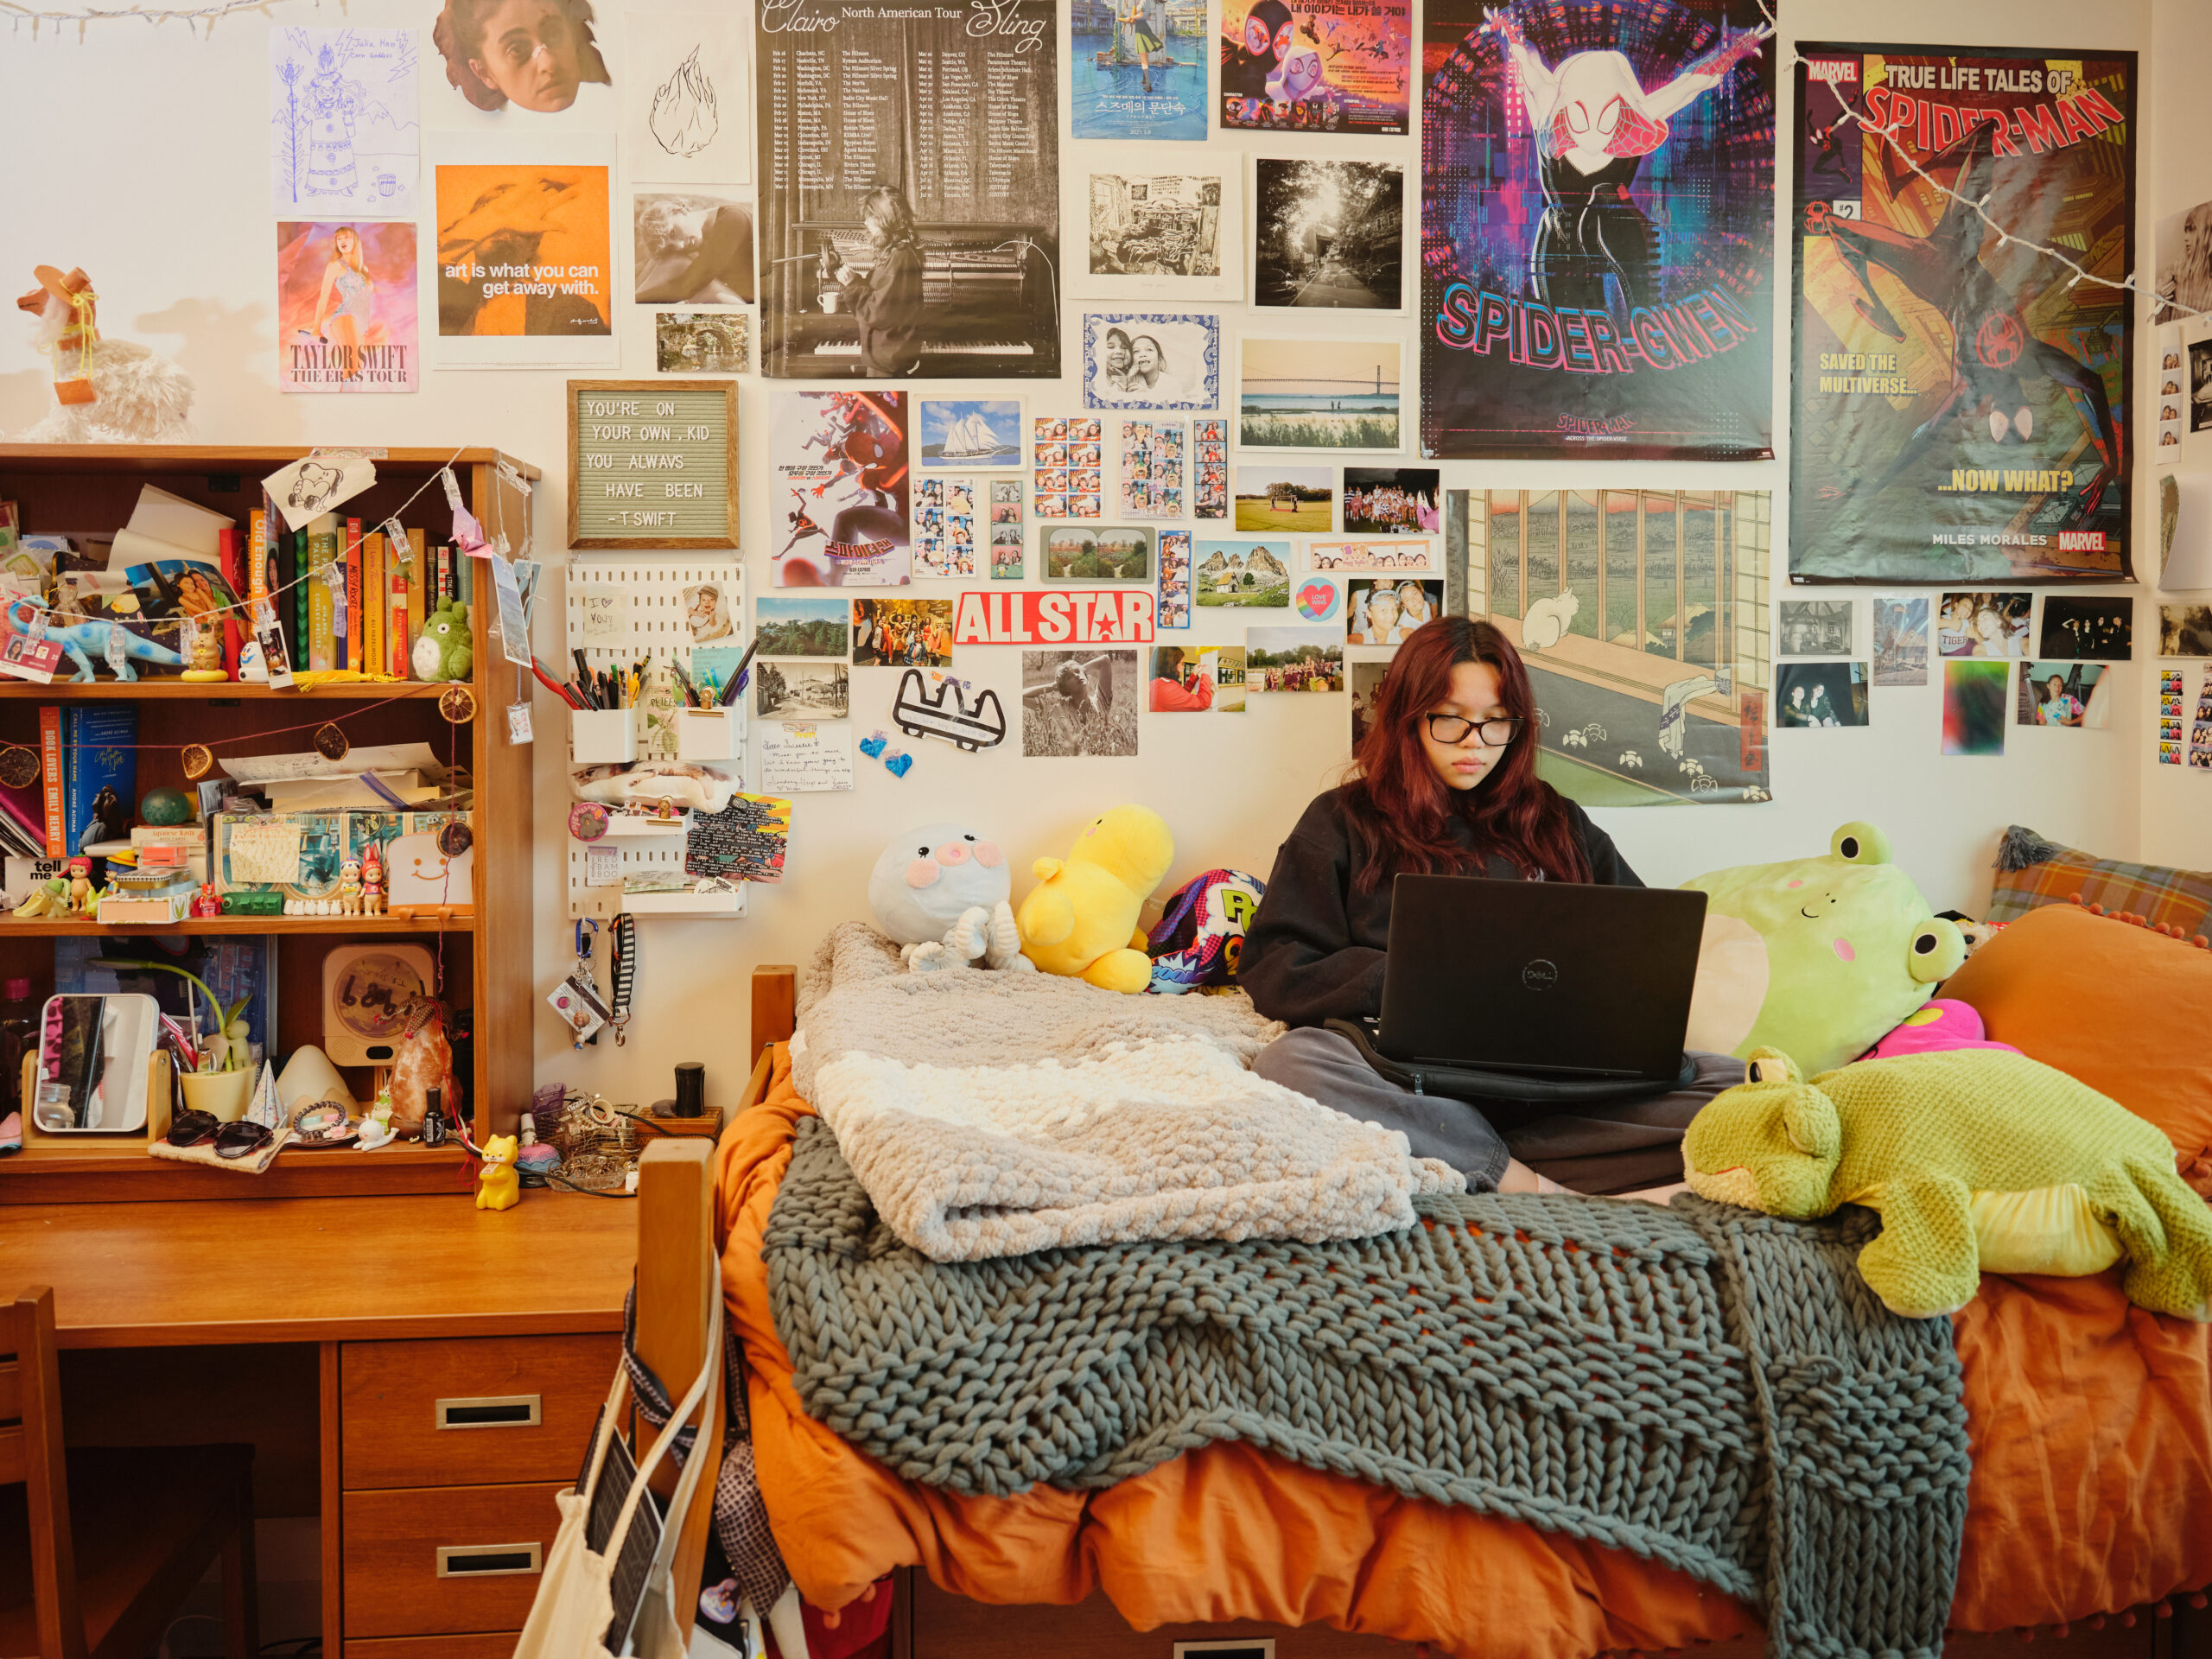 A young woman with long red hair and glasses sits on a bed, focused on her laptop. She is surrounded by plush toys, including a large frog pillow. The wall behind her is covered with various posters, photos, and artworks, including posters of Spider-Gwen and Spider-Man. The room is colorful and cozy, with a bookshelf on the left filled with books and assorted items. A desk with more personal items and decorations is also visible. The overall atmosphere is creative and personal, reflecting the occupant's interests and personality.